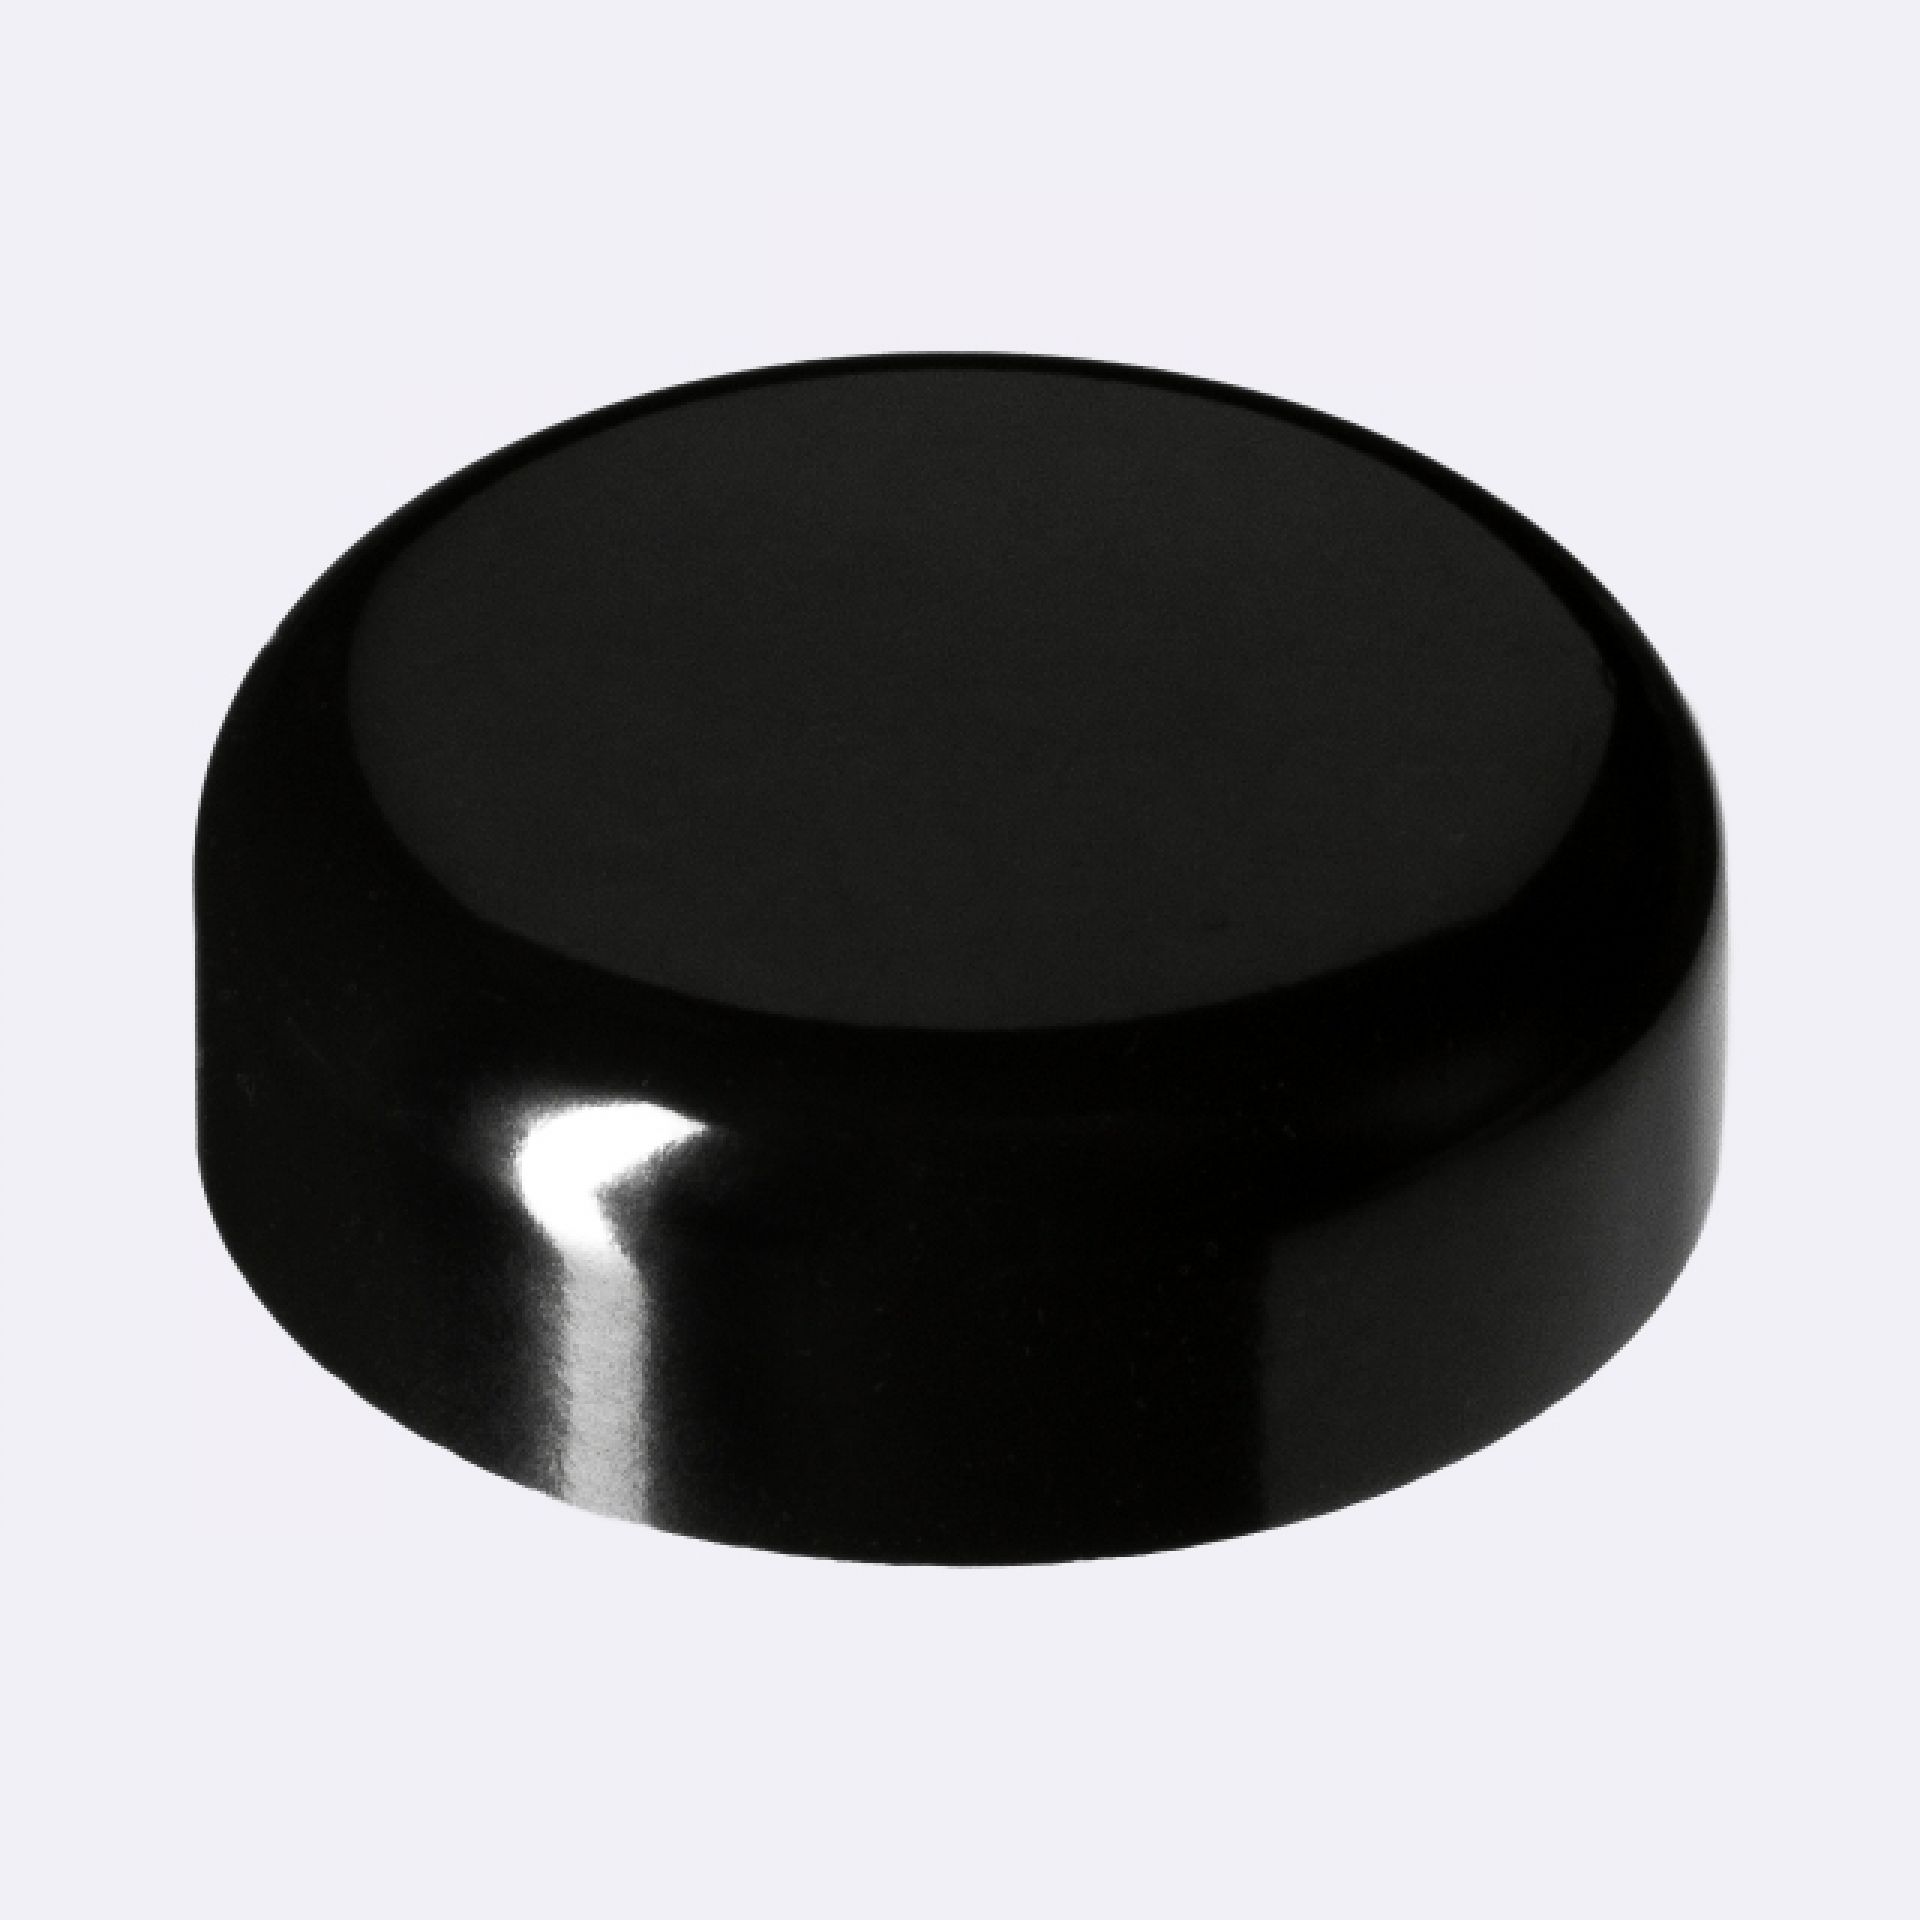 Lid Classic 34 special thread, UREA, black, glossy finish, violet Phan inlay (Ceres 10)